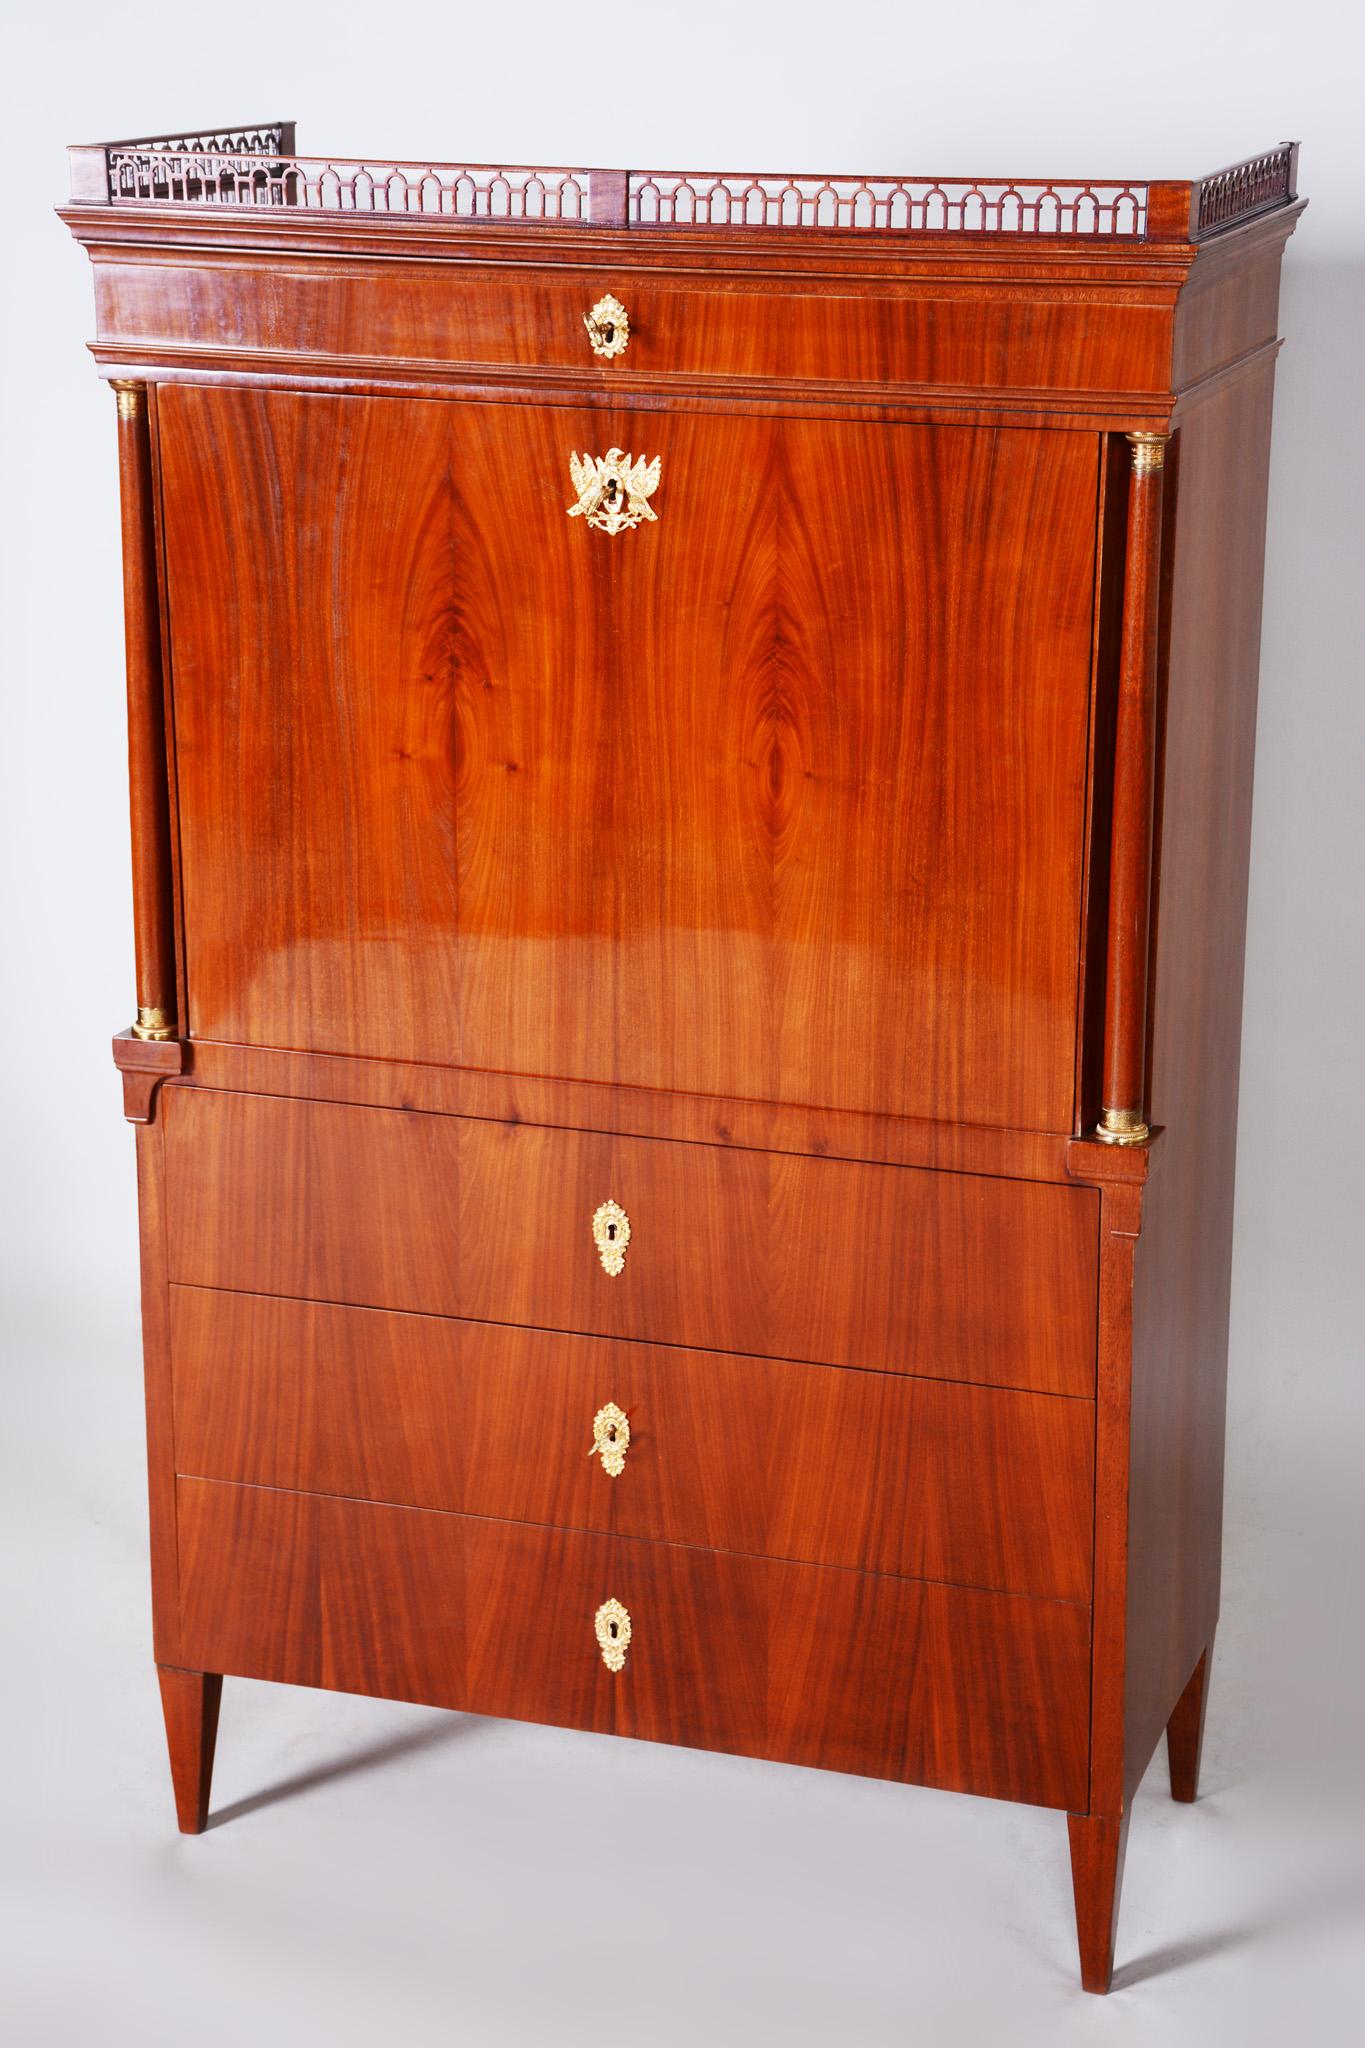 Empire secretary or writing desk, (Cylinder)
Material: Mahogany. 
Completely restored, Shellac polish.
Period: 1820-1829
Source: Austria, Wien.

We guarantee safe a the cheapest air transport from Europe to the whole world within 7 days.
The price